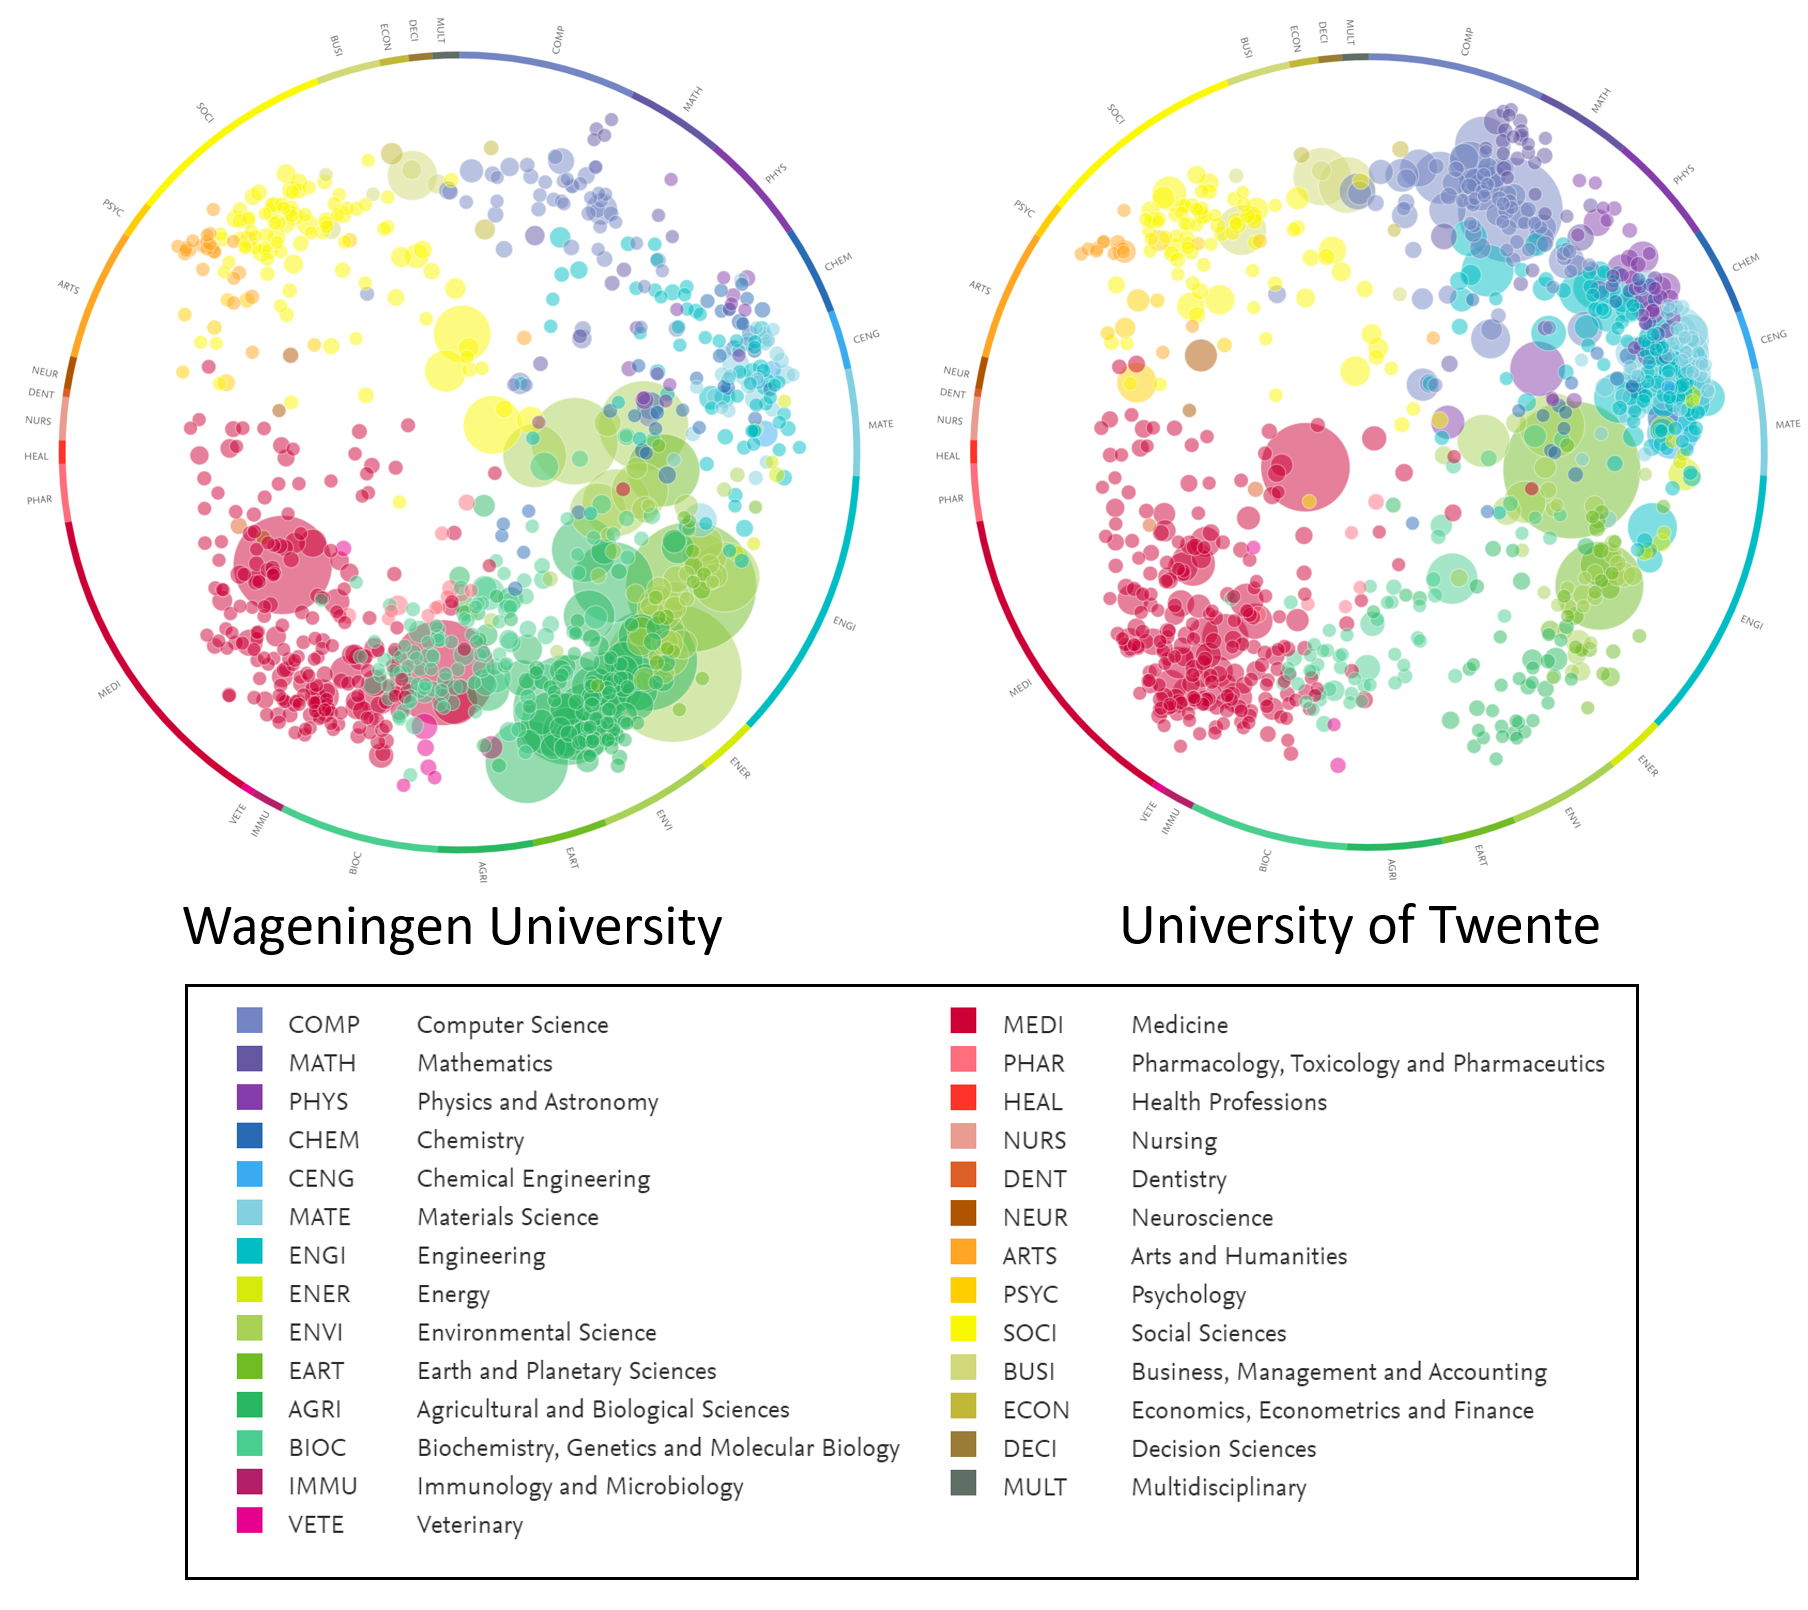 Figure 1. Visualisation of knowledge areas for two universities based on literature in SciVal (Elsevier, 2023)